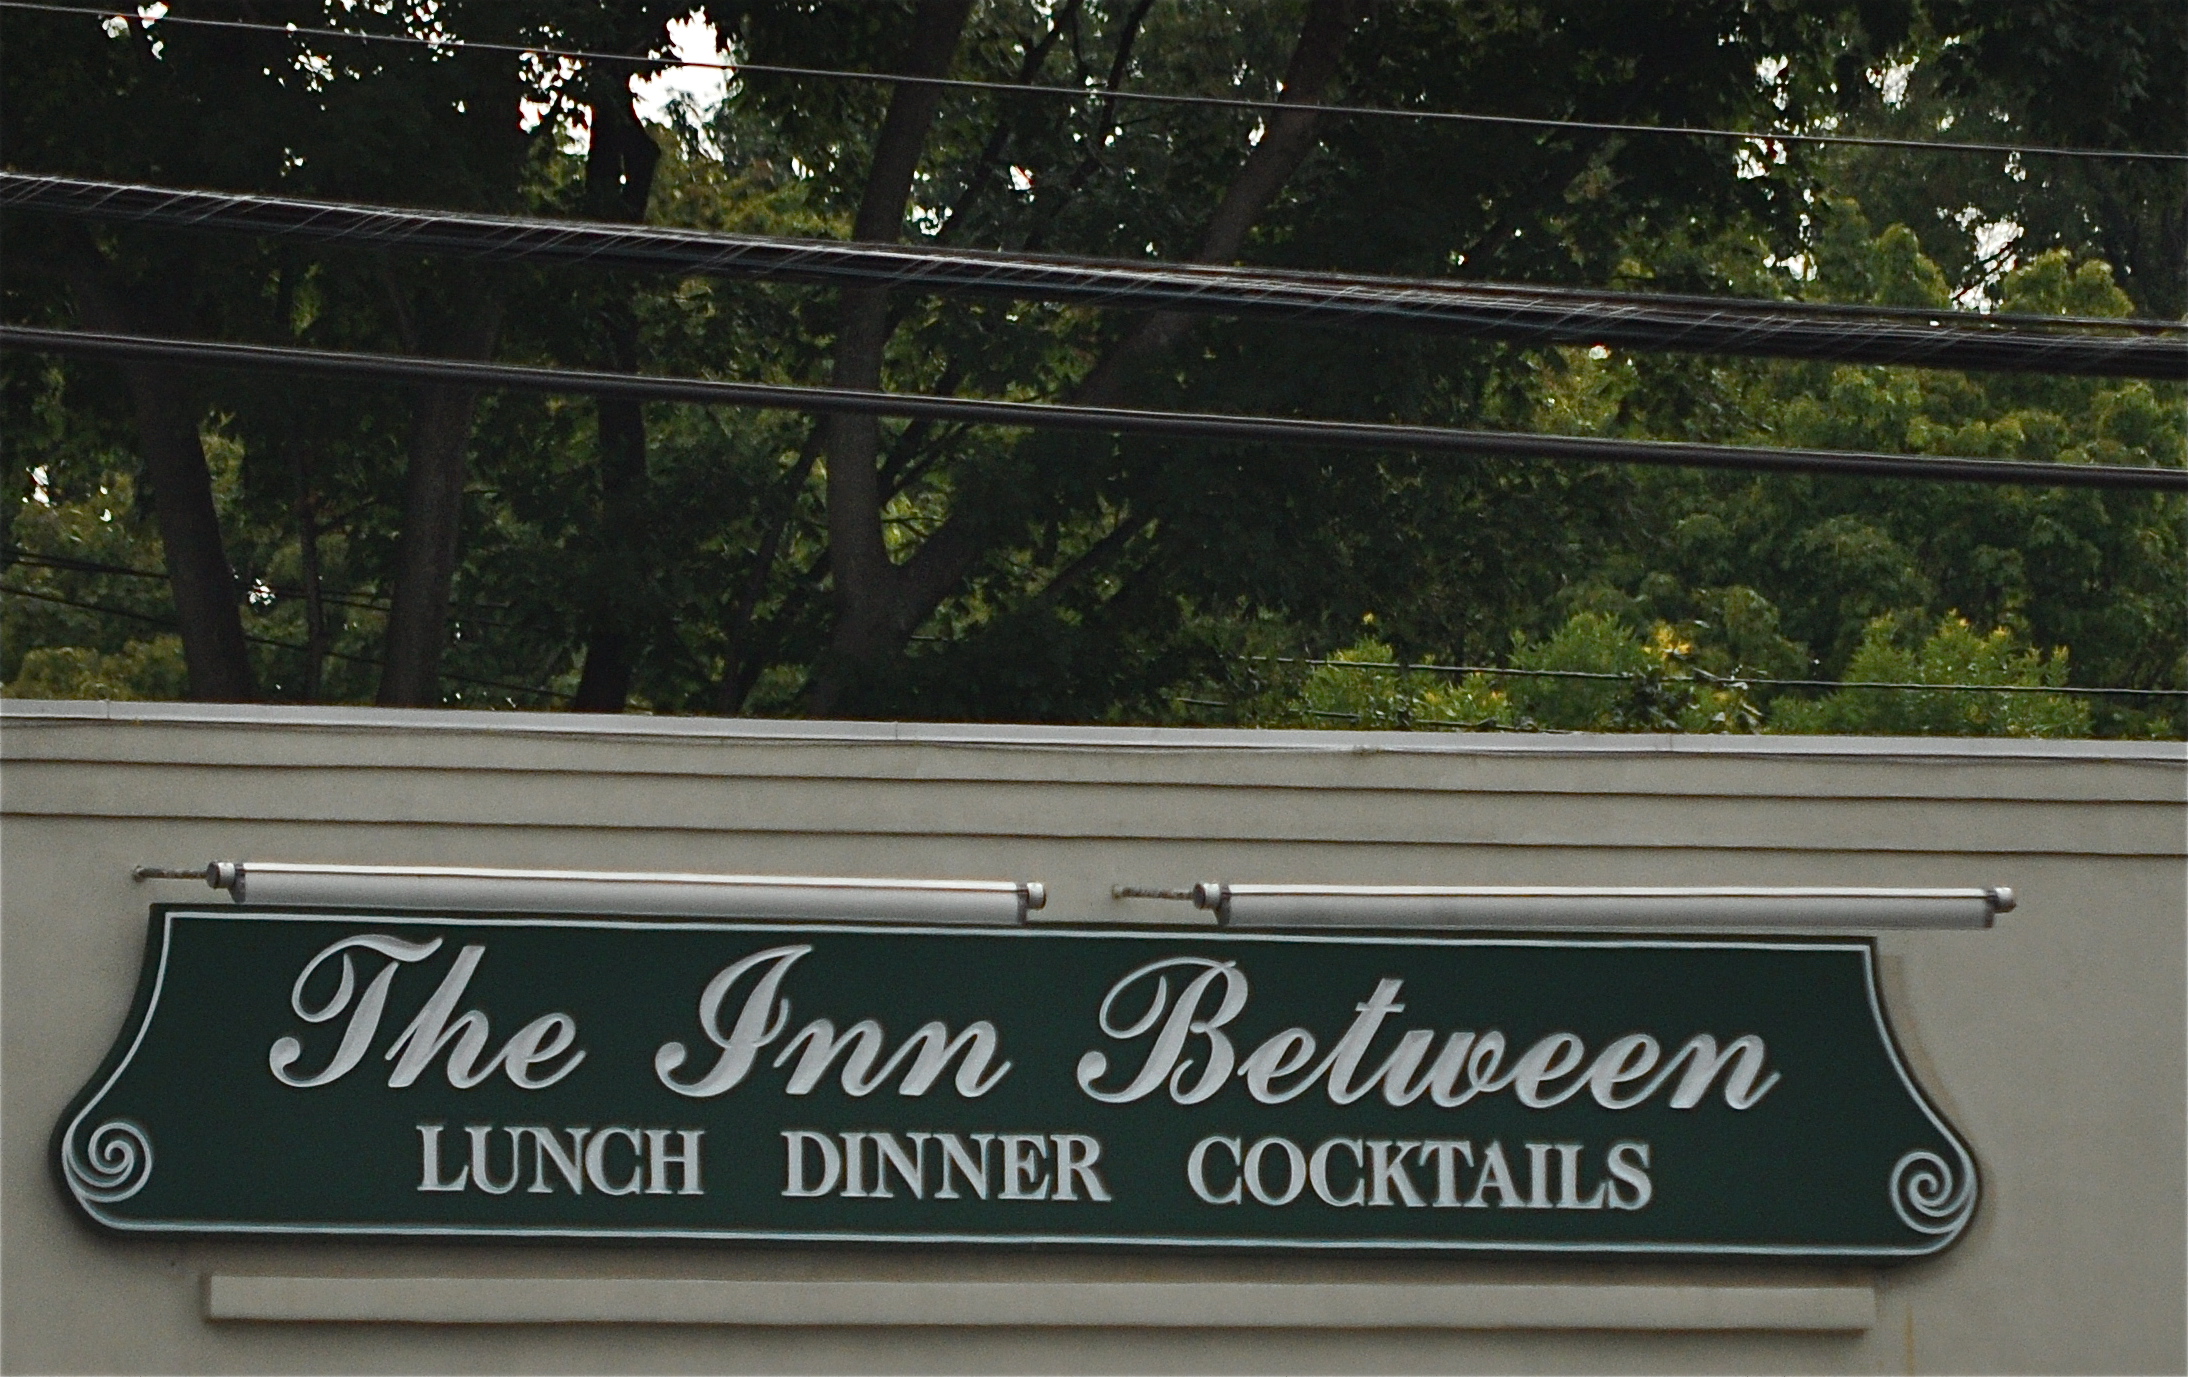 Clever Name for a Place to Dine